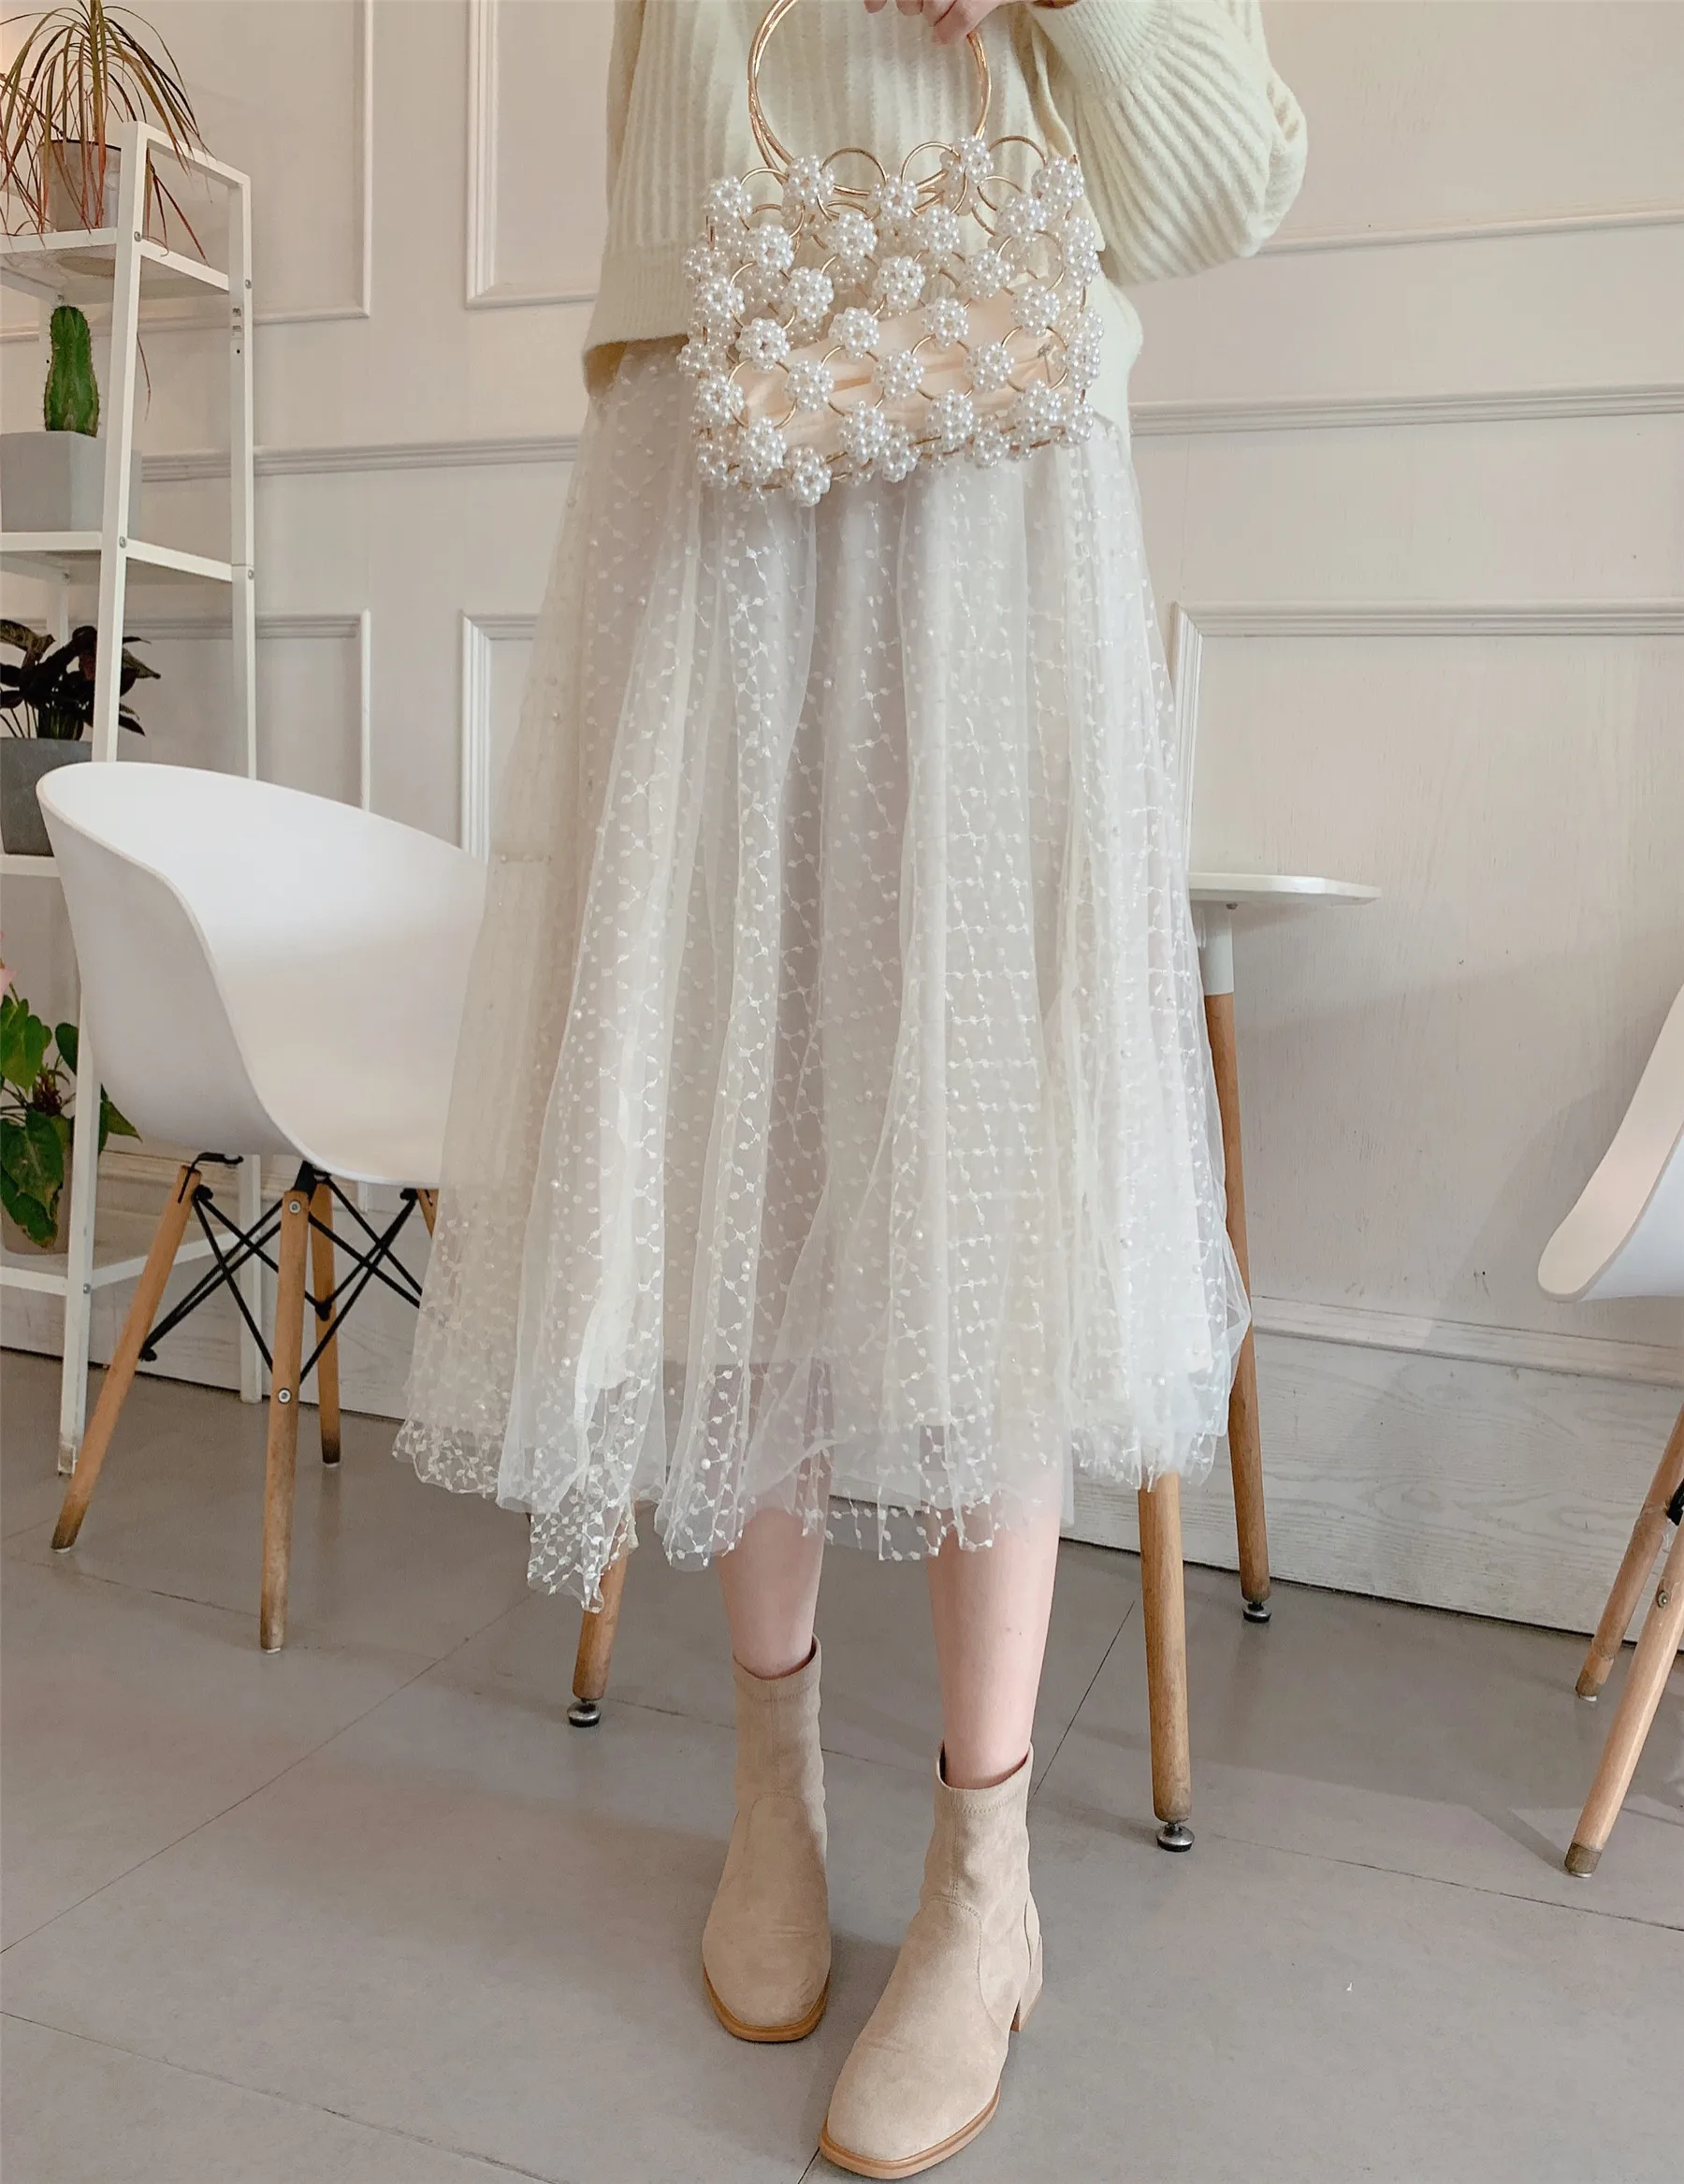 Pearl Skirt Slimming Pleated 2022 New Style Gentle Fairy Gauze Industrial Beads High-waisted Plus Velvet Women 's Mesh women fake pearl mesh scarf ruffle lace multi functional high elasticity neck wrap scarf headwear vintage pendant chiffon scarf